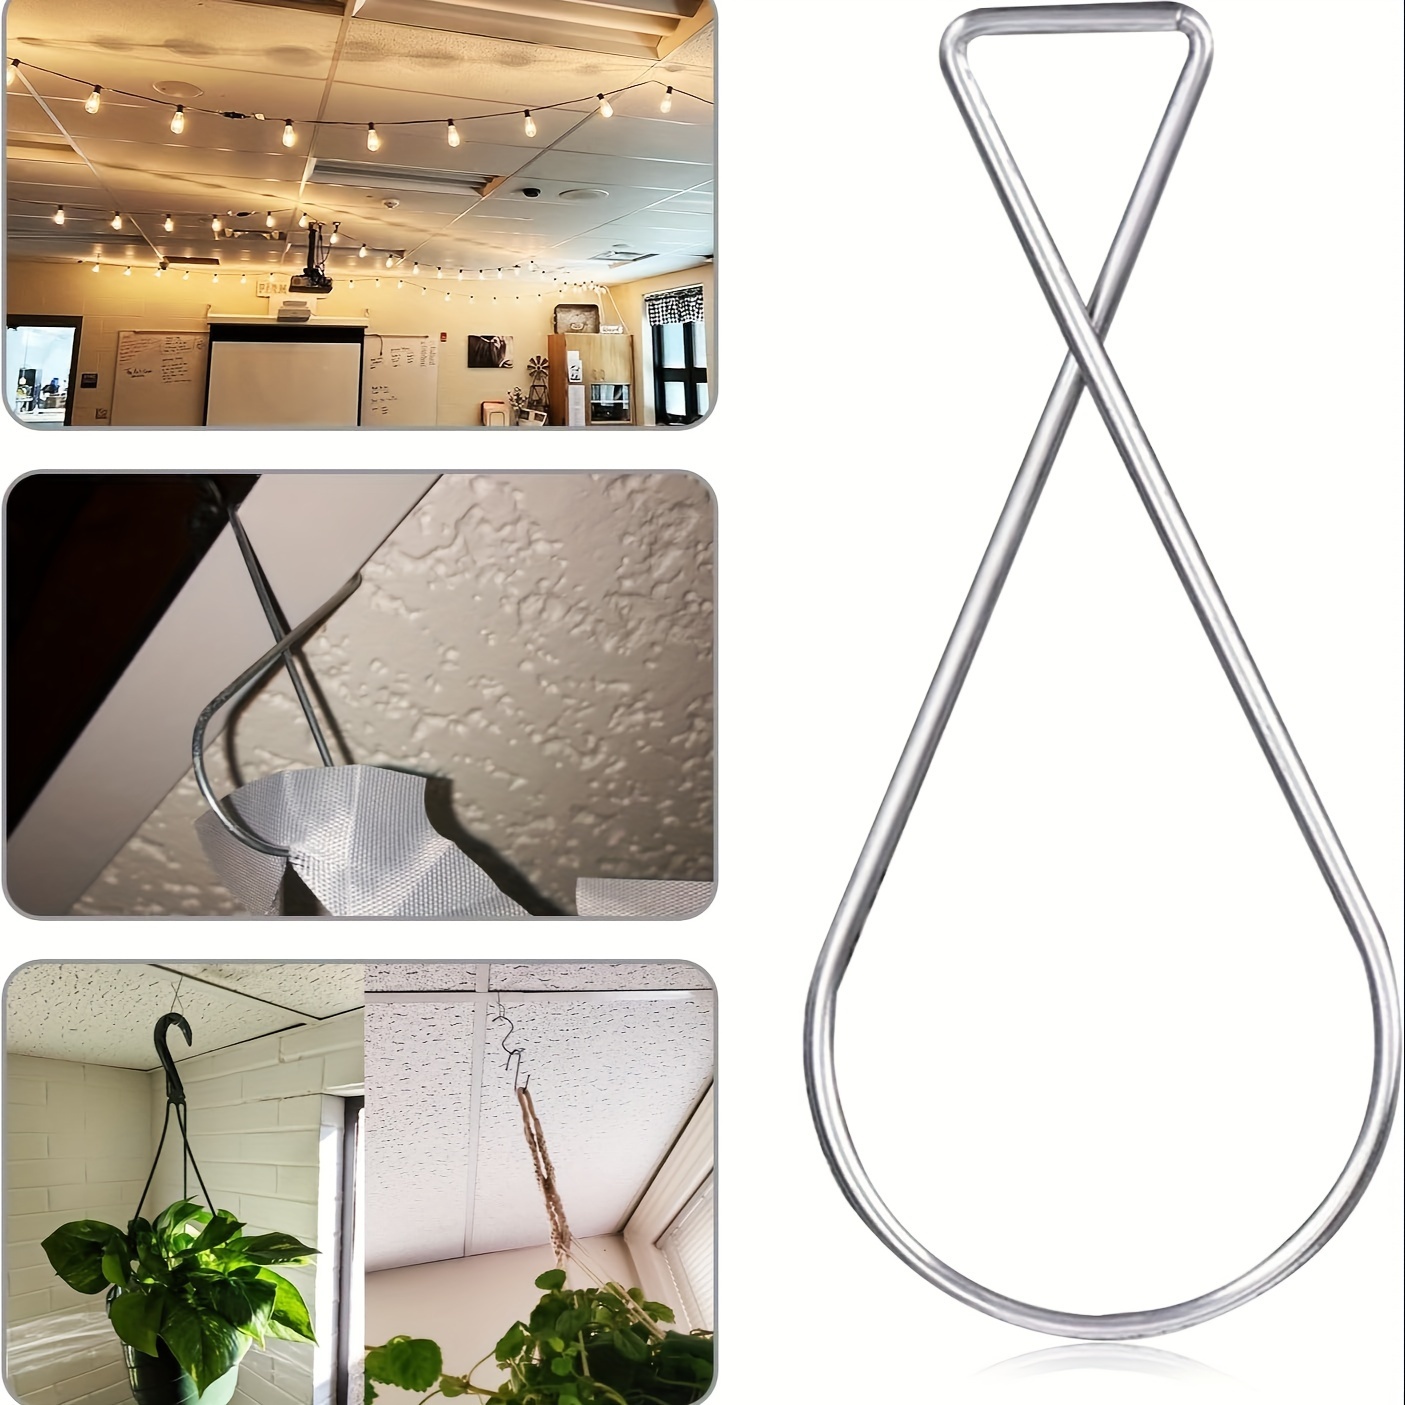 30pcs Ceiling Hook Clips Ceiling Tile Hooks T-bar Clips Drop Ceiling Clips  For Office, Classroom, Home And Wedding Decoration, Hanging Sign From Suspe